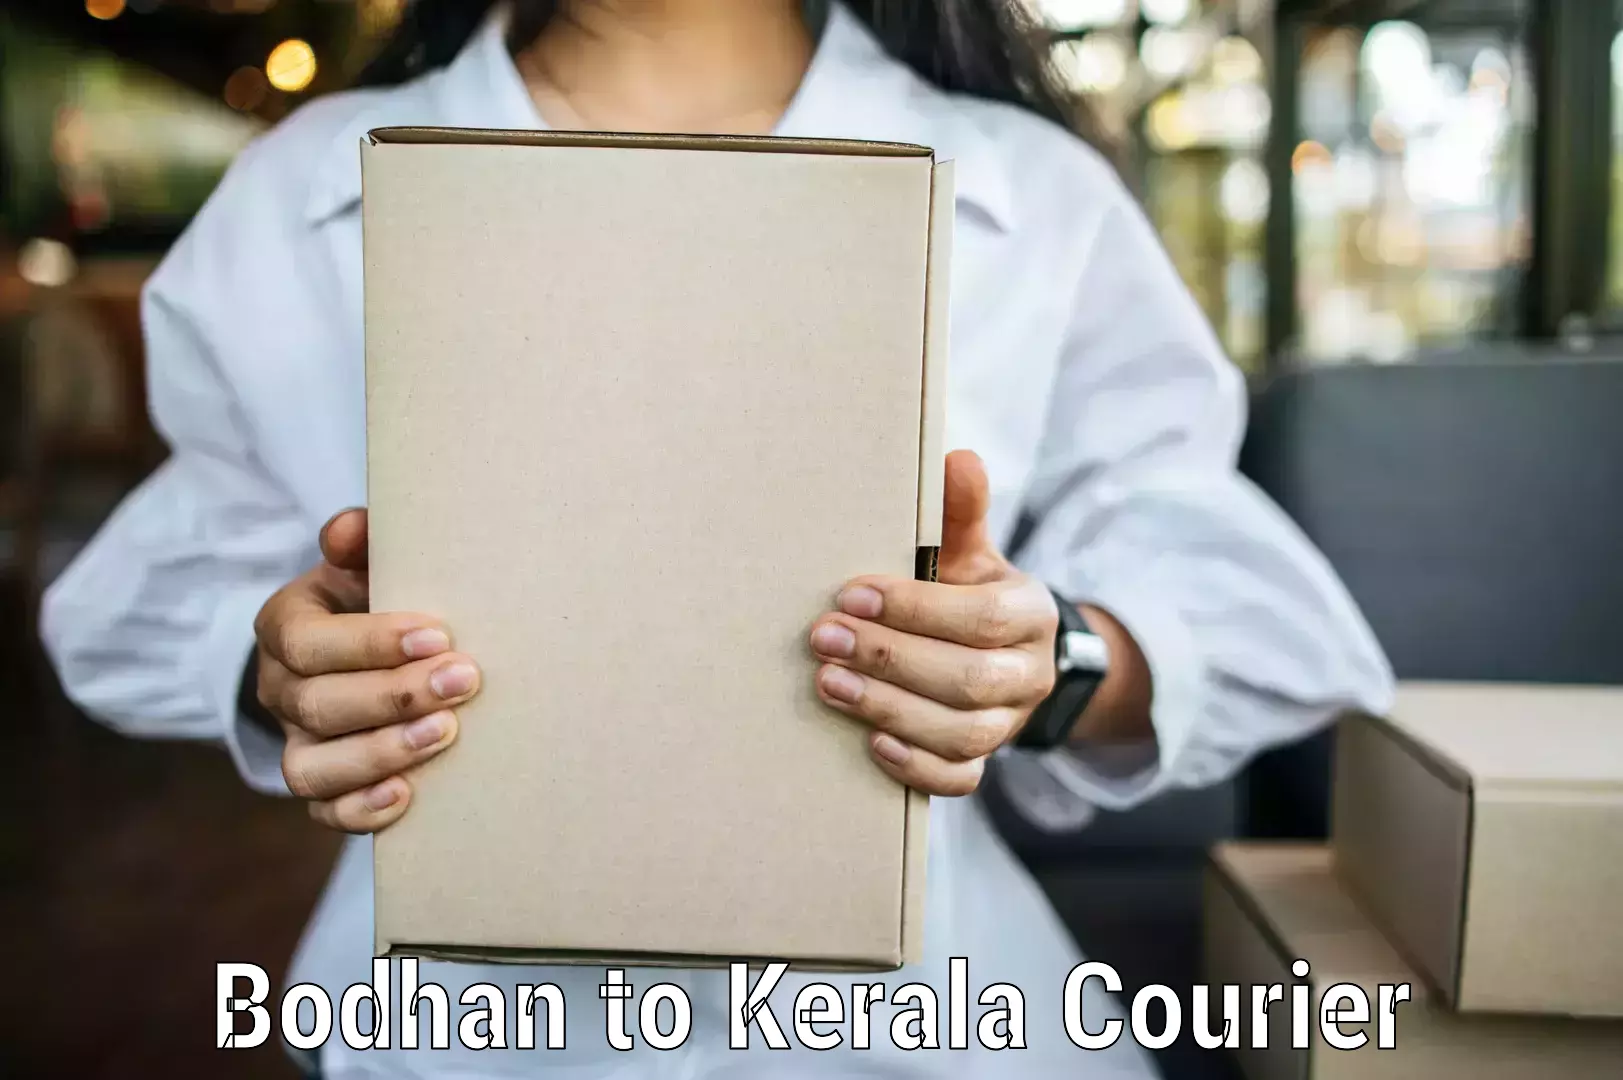 Sustainable delivery practices Bodhan to Cherthala